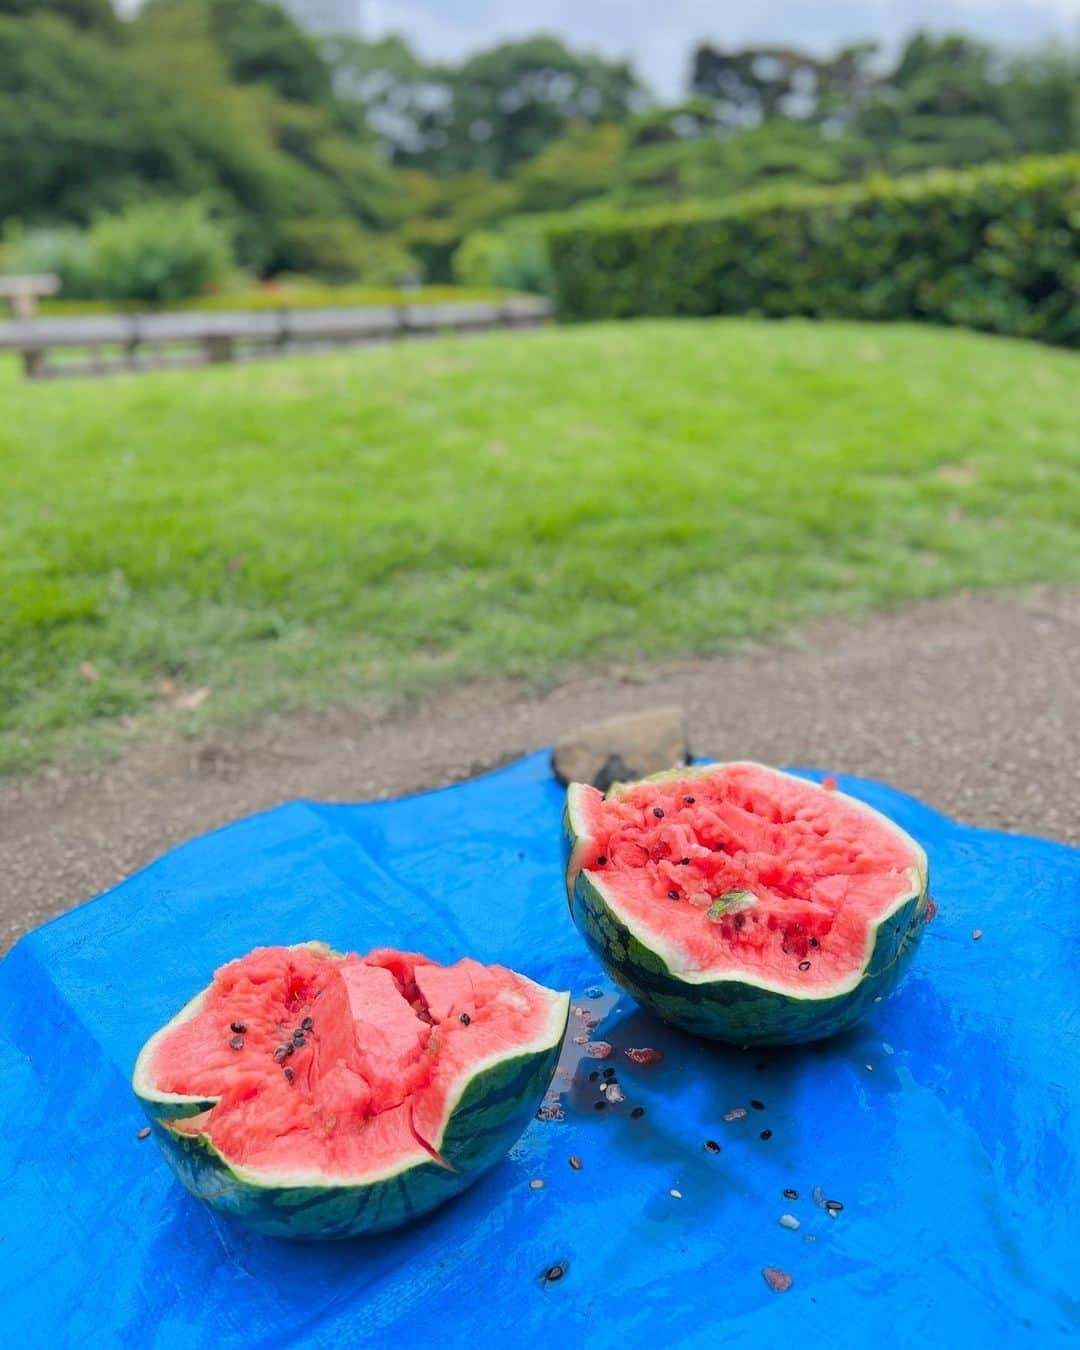 ホテル ニューオータニさんのインスタグラム写真 - (ホテル ニューオータニInstagram)「【July 27th is national Watermelon Day 本日7/27は #スイカ の日🍉】  During the summer holiday season in August, we will hold our annual watermelon splitting event in the garden this year for our guests only! After enjoying the splitting the watermelons guest can enjoy the cool and delicious watermelon under summer’s blue skies.  Other events include our popular "Garden Fireworks" (for guests only), an insect workshop open to guests, Kids Playland, an Uchiwa (Japanese fan) painting workshops and many more perfect activities for summer vacation.  For reservations and more information, tap the "HOTEL NEW OTANI SUMMER 2023" banner from the URL in @hotelnewotanitokyo profile and check the "Events" tab🔍.  8月の夏休み期間は、毎年恒例のお庭で#スイカ割り を、ご宿泊の方限定で今年も開催！青空の下、スイカ割りを愉しんだ後は、ひんやり冷えたスイカをお召し上がりいただけます。  そのほかにも、毎年大人気の「お庭で花火」（宿泊者限定）や、外来の方も参加可能な昆虫教室、プレイランド・うちわの絵付け体験など、夏休みにピッタリのイベントを多数ご用意しております。  ◇ご予約・詳細は @hotelnewotanitokyo プロフィールのURLより「HOTEL NEW OTANI SUMMER 2023」バナーをタップして、「イベント」タブをチェック🔍  Only for guests staying at the HOTEL NEW OTANI Fireworks in the garden 8/1-27 Lantern Garden Walk 8/1-31 Summer Yoga & Stretch Class 8/5, 19, 26 Watermelon Split in the Garden 8/12 & 8/13  Non staying guest participation available Otani Kids Land (Playland, Uchiwa Painting Experience) 8/12-8/15 Let's capture your summer memories with a photo shoot by professional photographers 8/12-8/15 Summer Vacation Insect Workshop 8/13 SDGs workshop for parents and children to think about sustainable future foods 8/20  *Photographs shown are from last year.  【宿泊者限定】 お庭で花火 8/1〜27 ランタンガーデンウォーク 8/1〜31 サマーヨガ&ストレッチ教室 8/5・19・26 お庭でスイカ割り 8/12・8/13  【外来参加可】 オータニキッズランド(プレイランド・うちわの絵付け体験) 8/12〜8/15 思い出を写そう(プロカメラマンによる撮影) 8/12〜8/15 夏休み昆虫教室 8/13 未来の食を考える、親子でSDGsワークショップ 8/20  ※写真は昨年の様子です。  投稿で招待券プレゼント🎁 #ニューオータニホリデー キャンペーン🍉🌻  ホテルニューオータニで過ごした夏の思い出の写真または動画に「@hotelnewotanitokyo」をタグ付けし、「#ニューオータニホリデー」とハッシュタグを付けて投稿してください。抽選で宿泊やレストランのご招待券をプレゼントいたします。  応募期間：2023年8月31日（木）まで  #自由研究  #夏休み #夏 #夏休み旅行  #家族旅行 #家族連れ #お子さま連れok #お子さま連れ大歓迎  #ガーデンプール #プール #ホテルプール #ホテル #東京ホテル #ホテルステイ  #ホテルニューオータニ #ニューオータニ #hotelnewotani #newotani #赤坂見附 #赤坂 #四ツ谷 #tokyotravel #tokyohotel  #virtualtour#forbestravelguide #futuretravelguide #thepreferredlife」7月27日 13時21分 - hotelnewotanitokyo